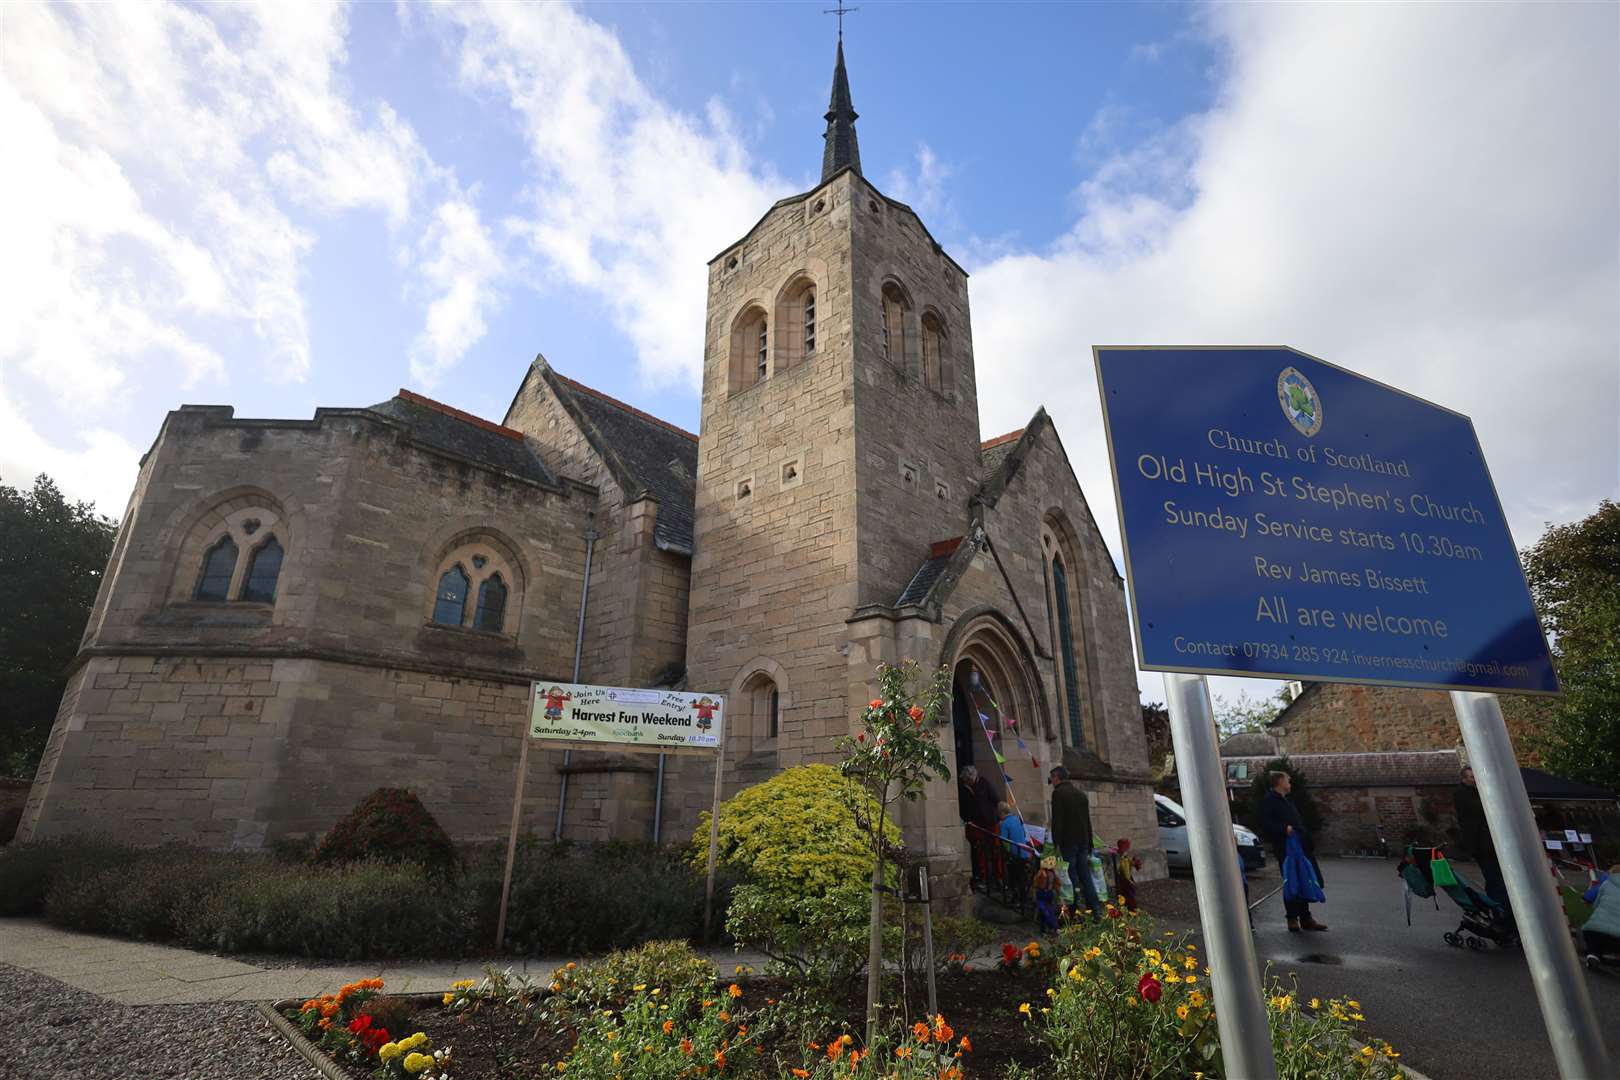 Elders at Old High St Stephen's Church have been recognised for their long service.